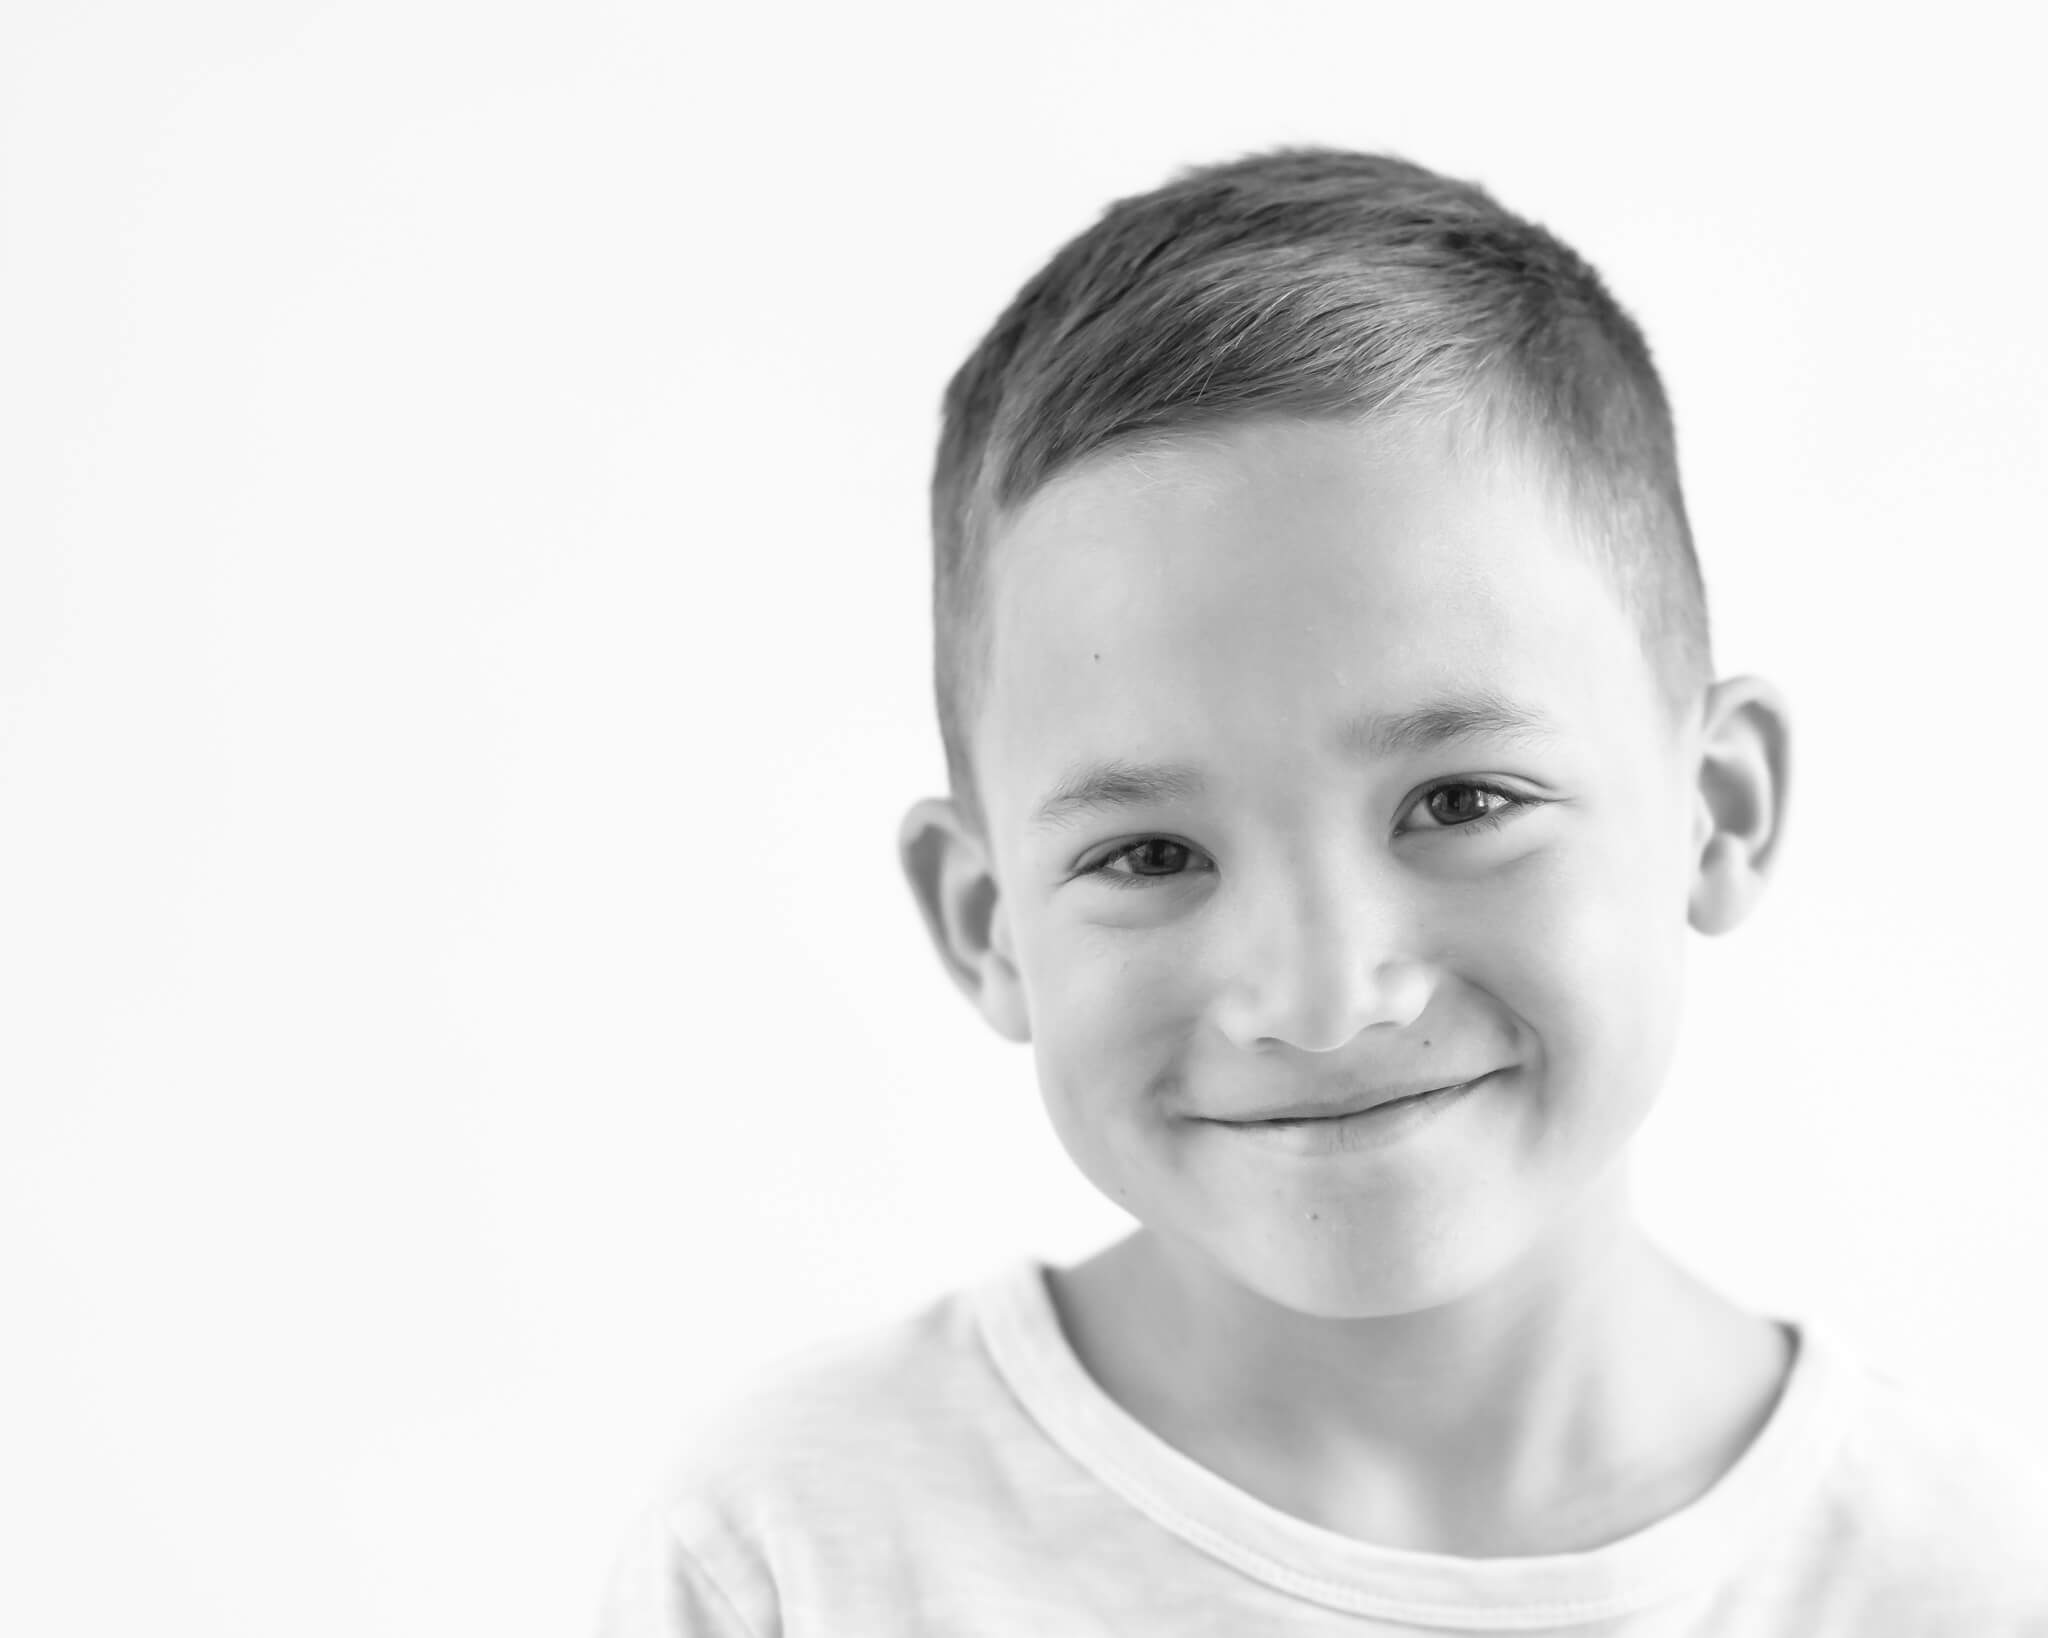 8 year old boy black and white studio portrait captured by Allison Amores Photography